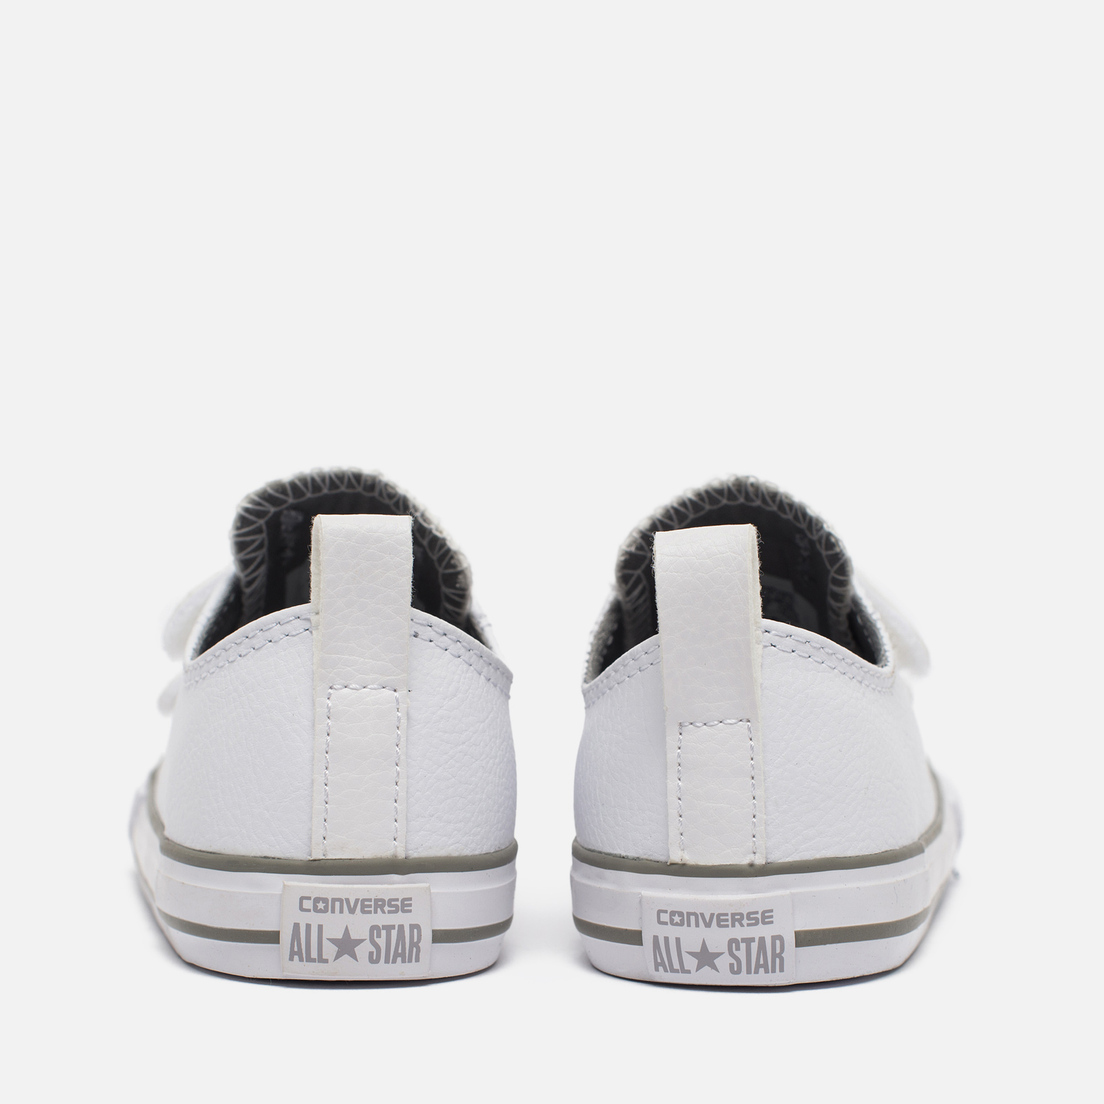 Converse Детские кеды Chuck Taylor All Star 2V Leather Toddler Low Top